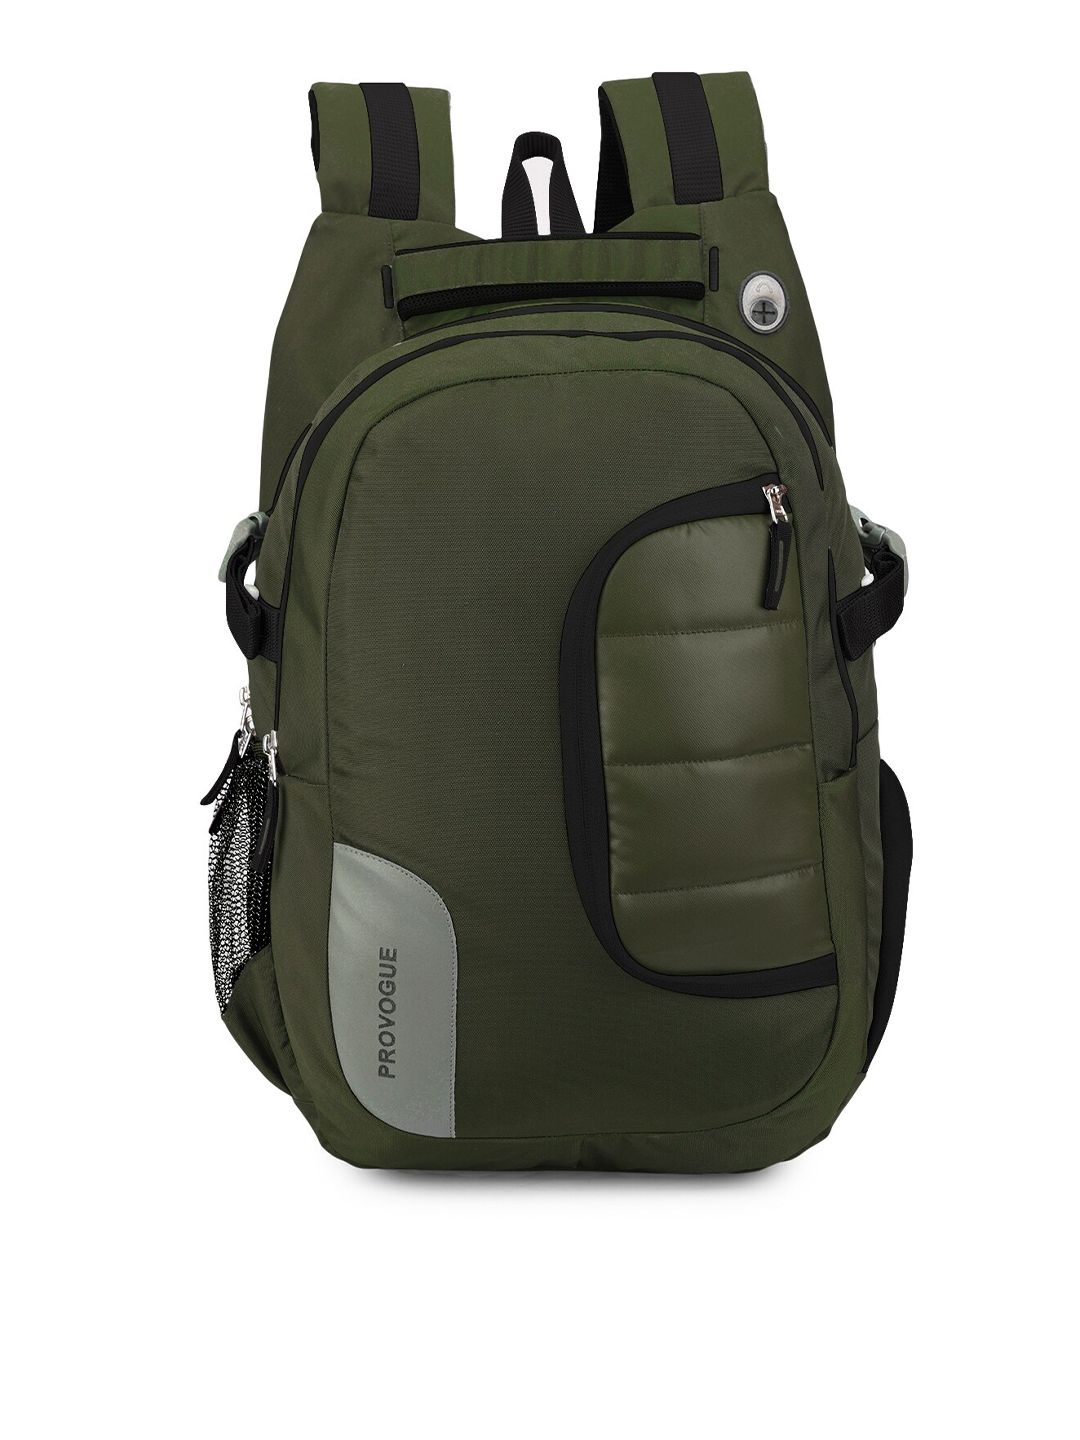 Provogue Unisex Olive Green & Black Brand Logo Backpack with Reflective Strip Price in India